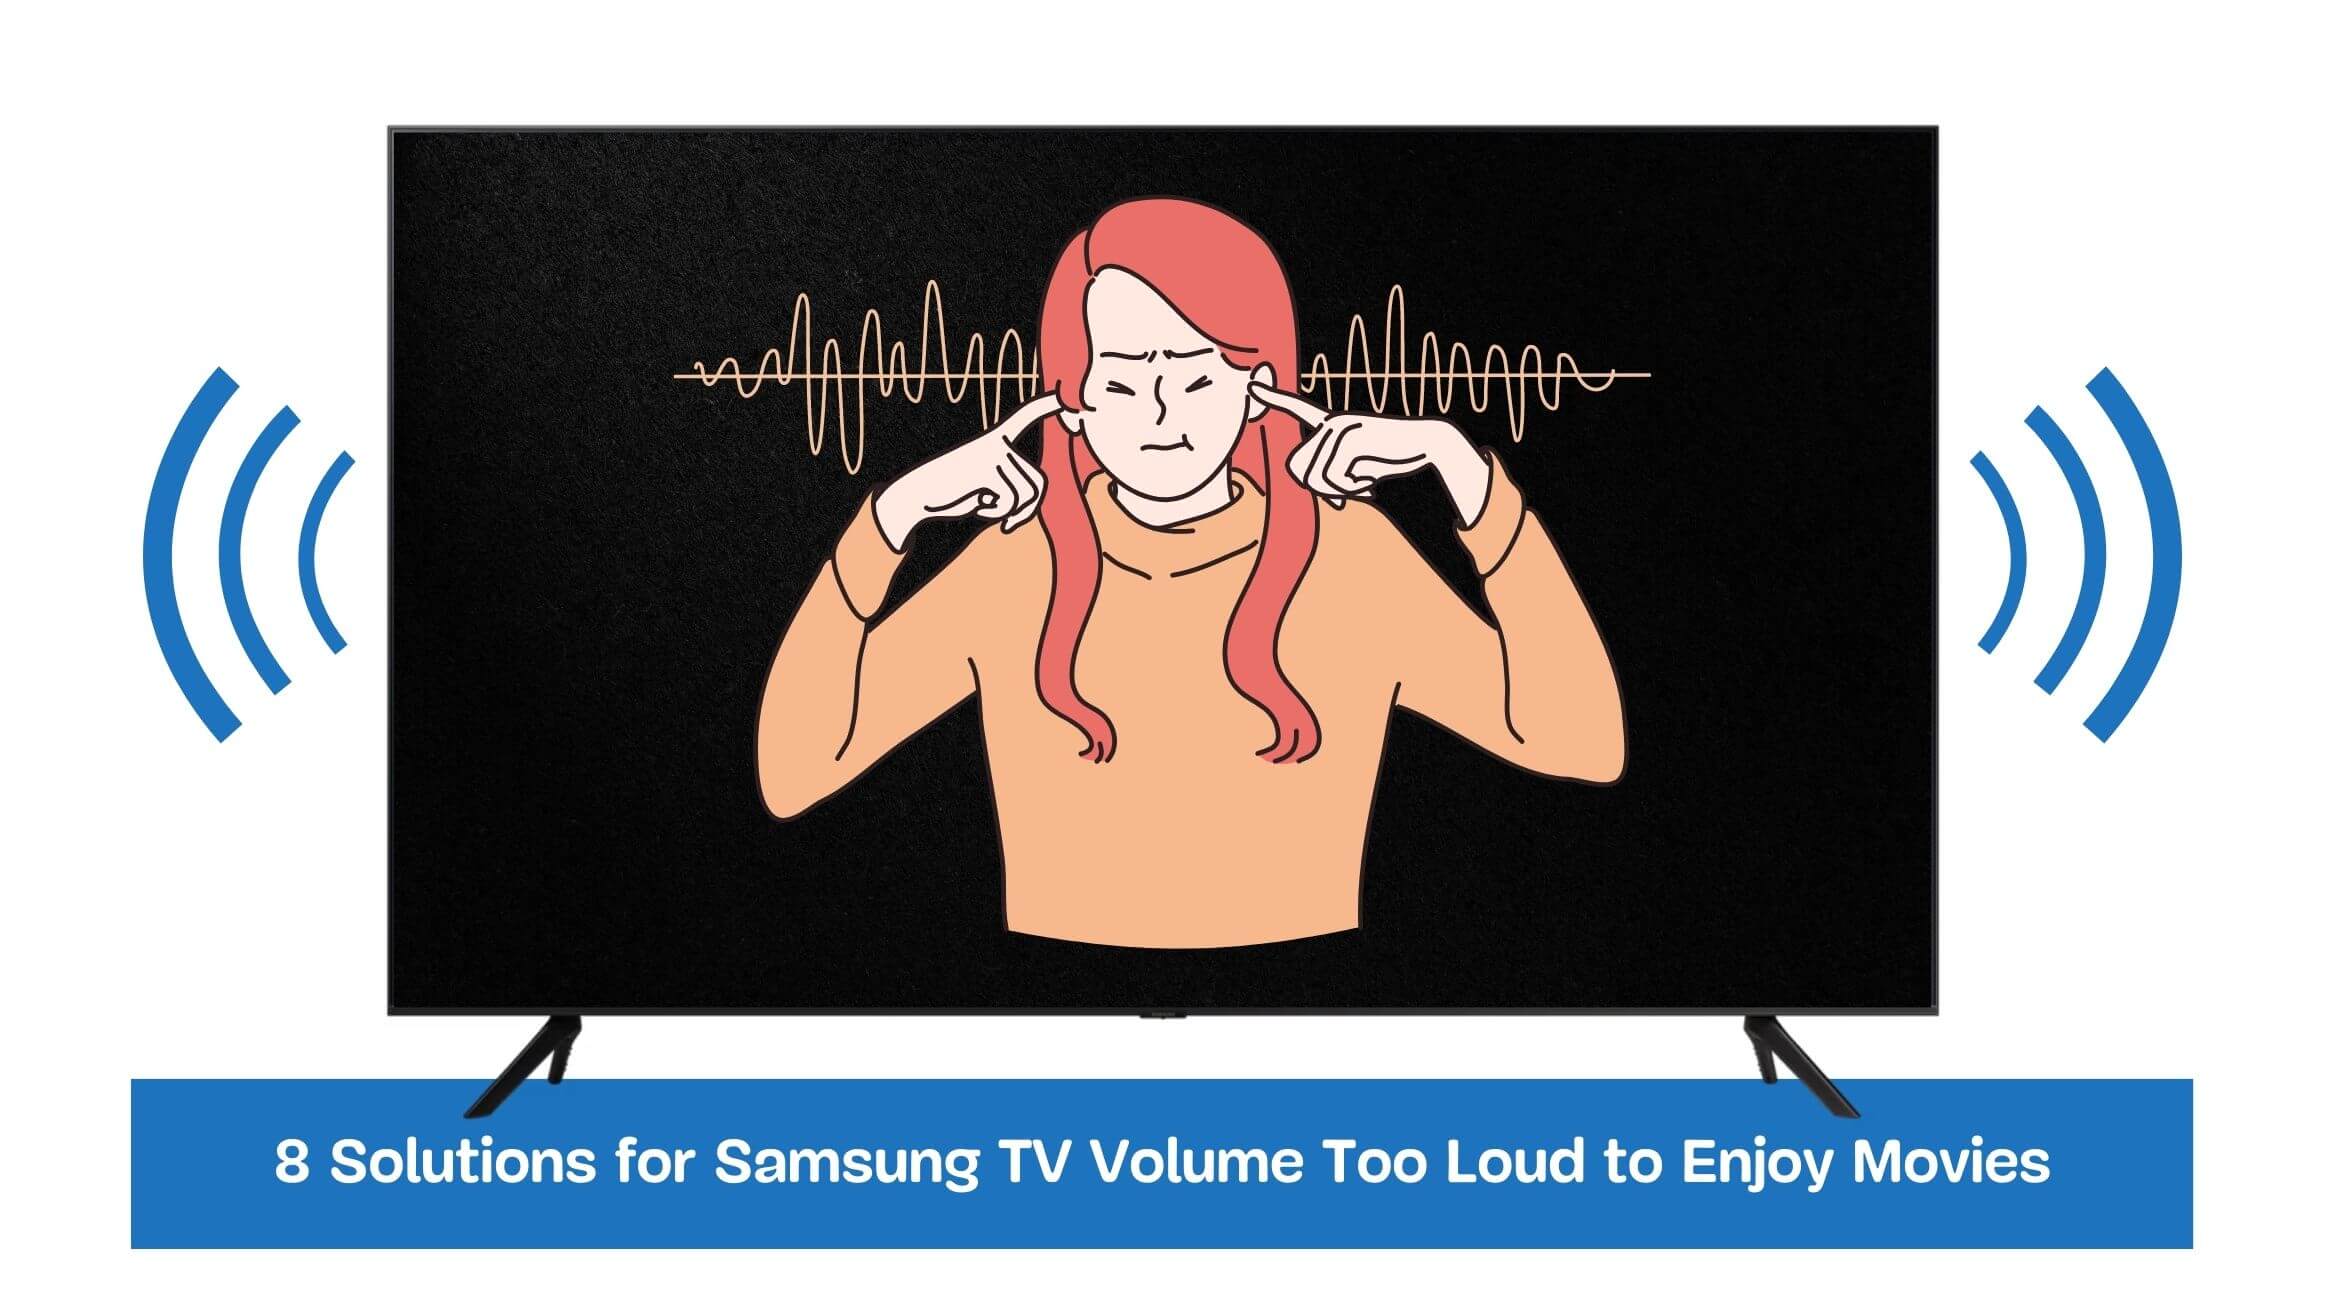 8 Solutions for Samsung TV Volume Too Loud to Enjoy Movies